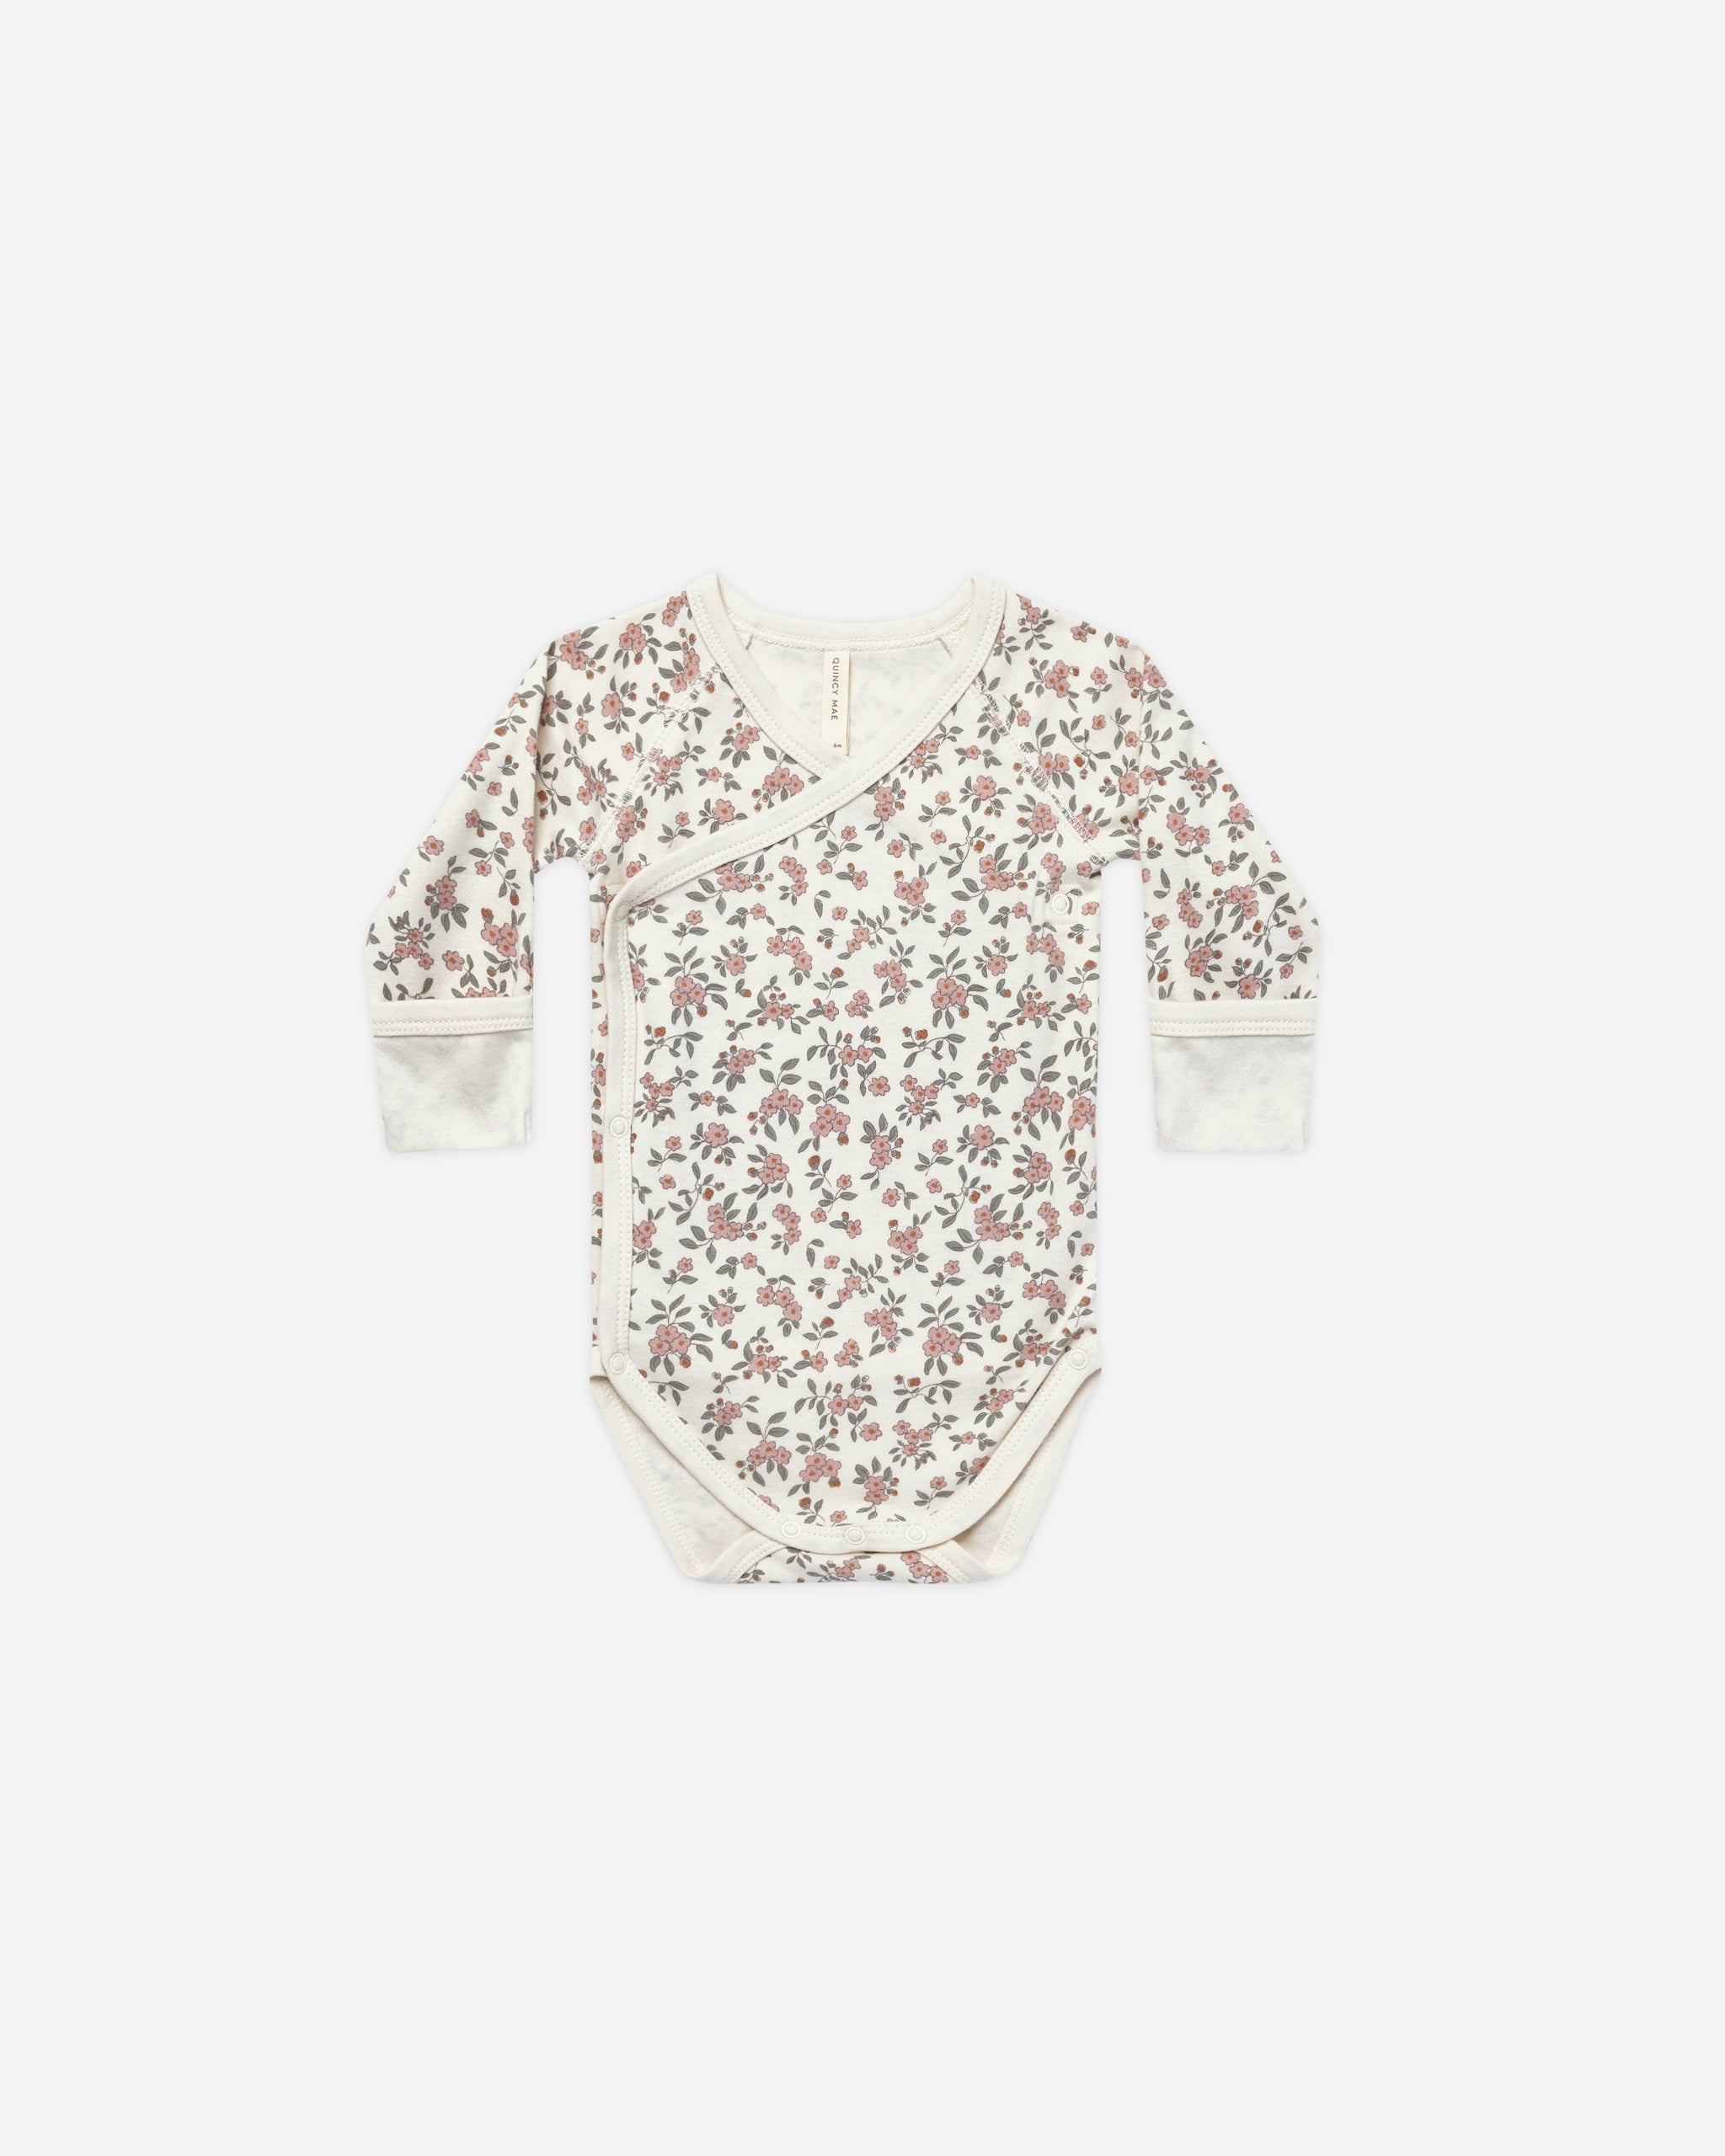 Side-Snap Bodysuit || Meadow - Rylee + Cru | Kids Clothes | Trendy Baby Clothes | Modern Infant Outfits |